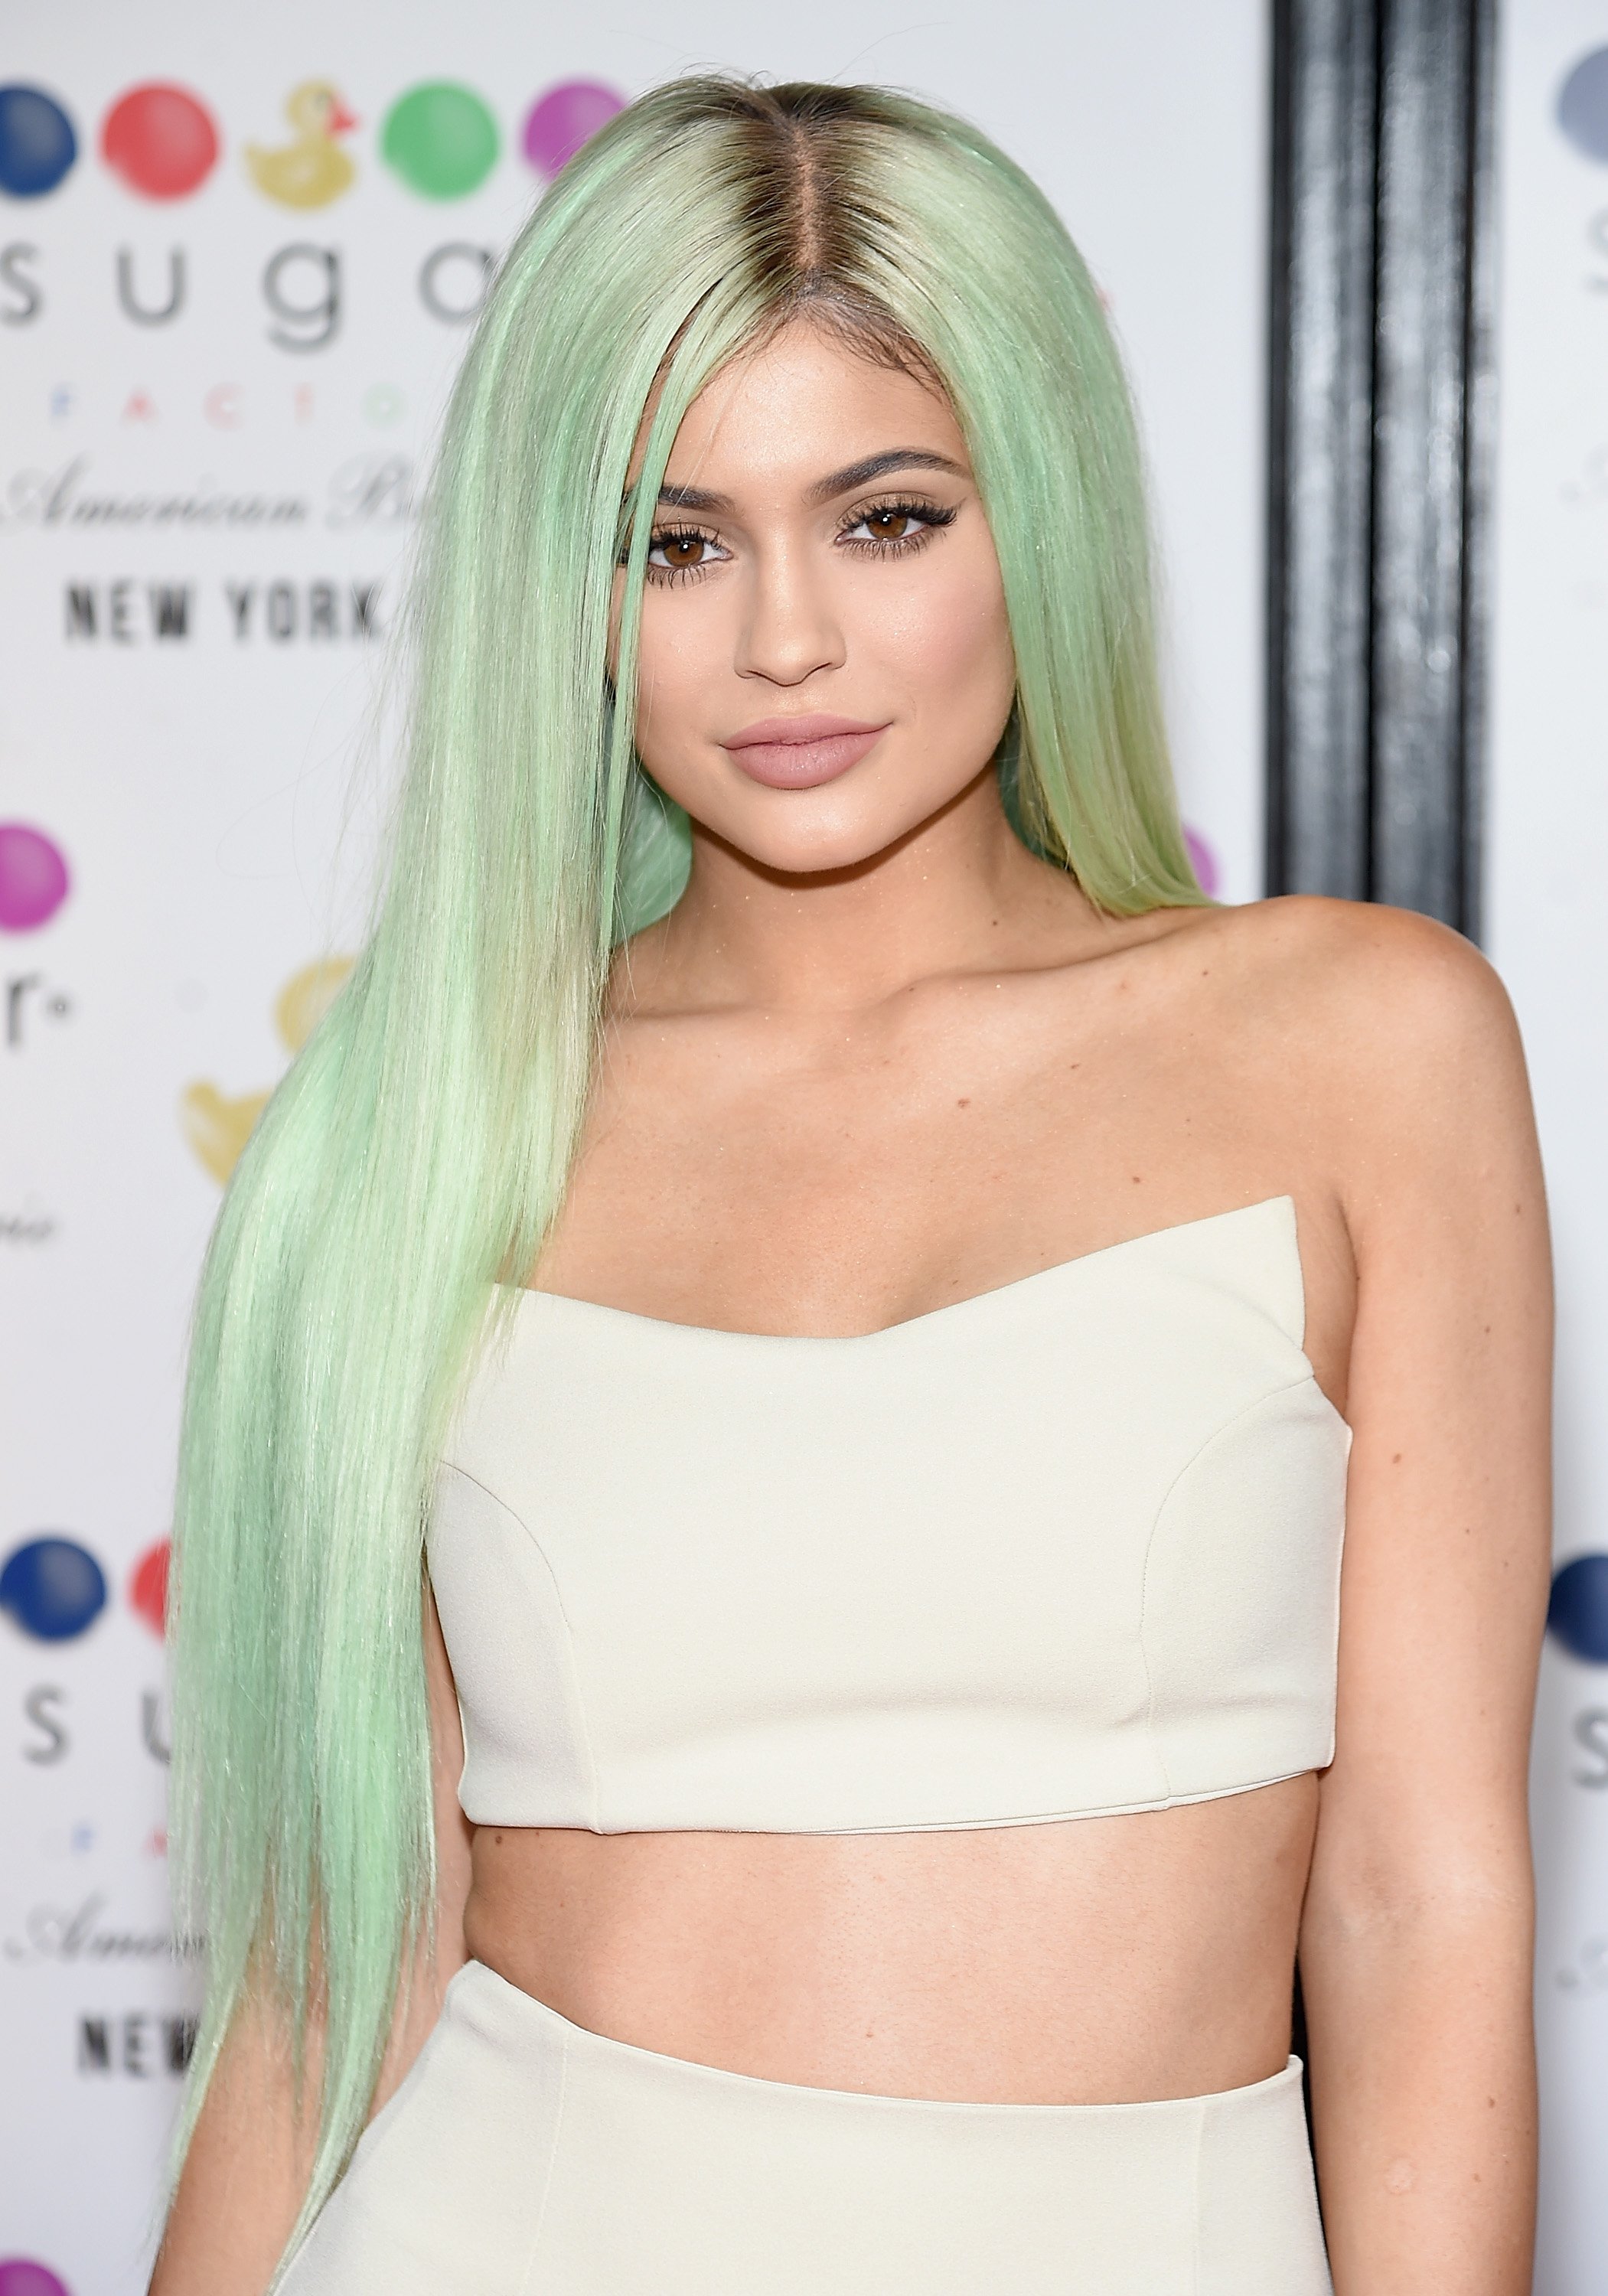 Kylie Jenner attends the grand opening of the Sugar Factory American Brasserie on September 16, 2015 in New York City. | Source: Getty Images